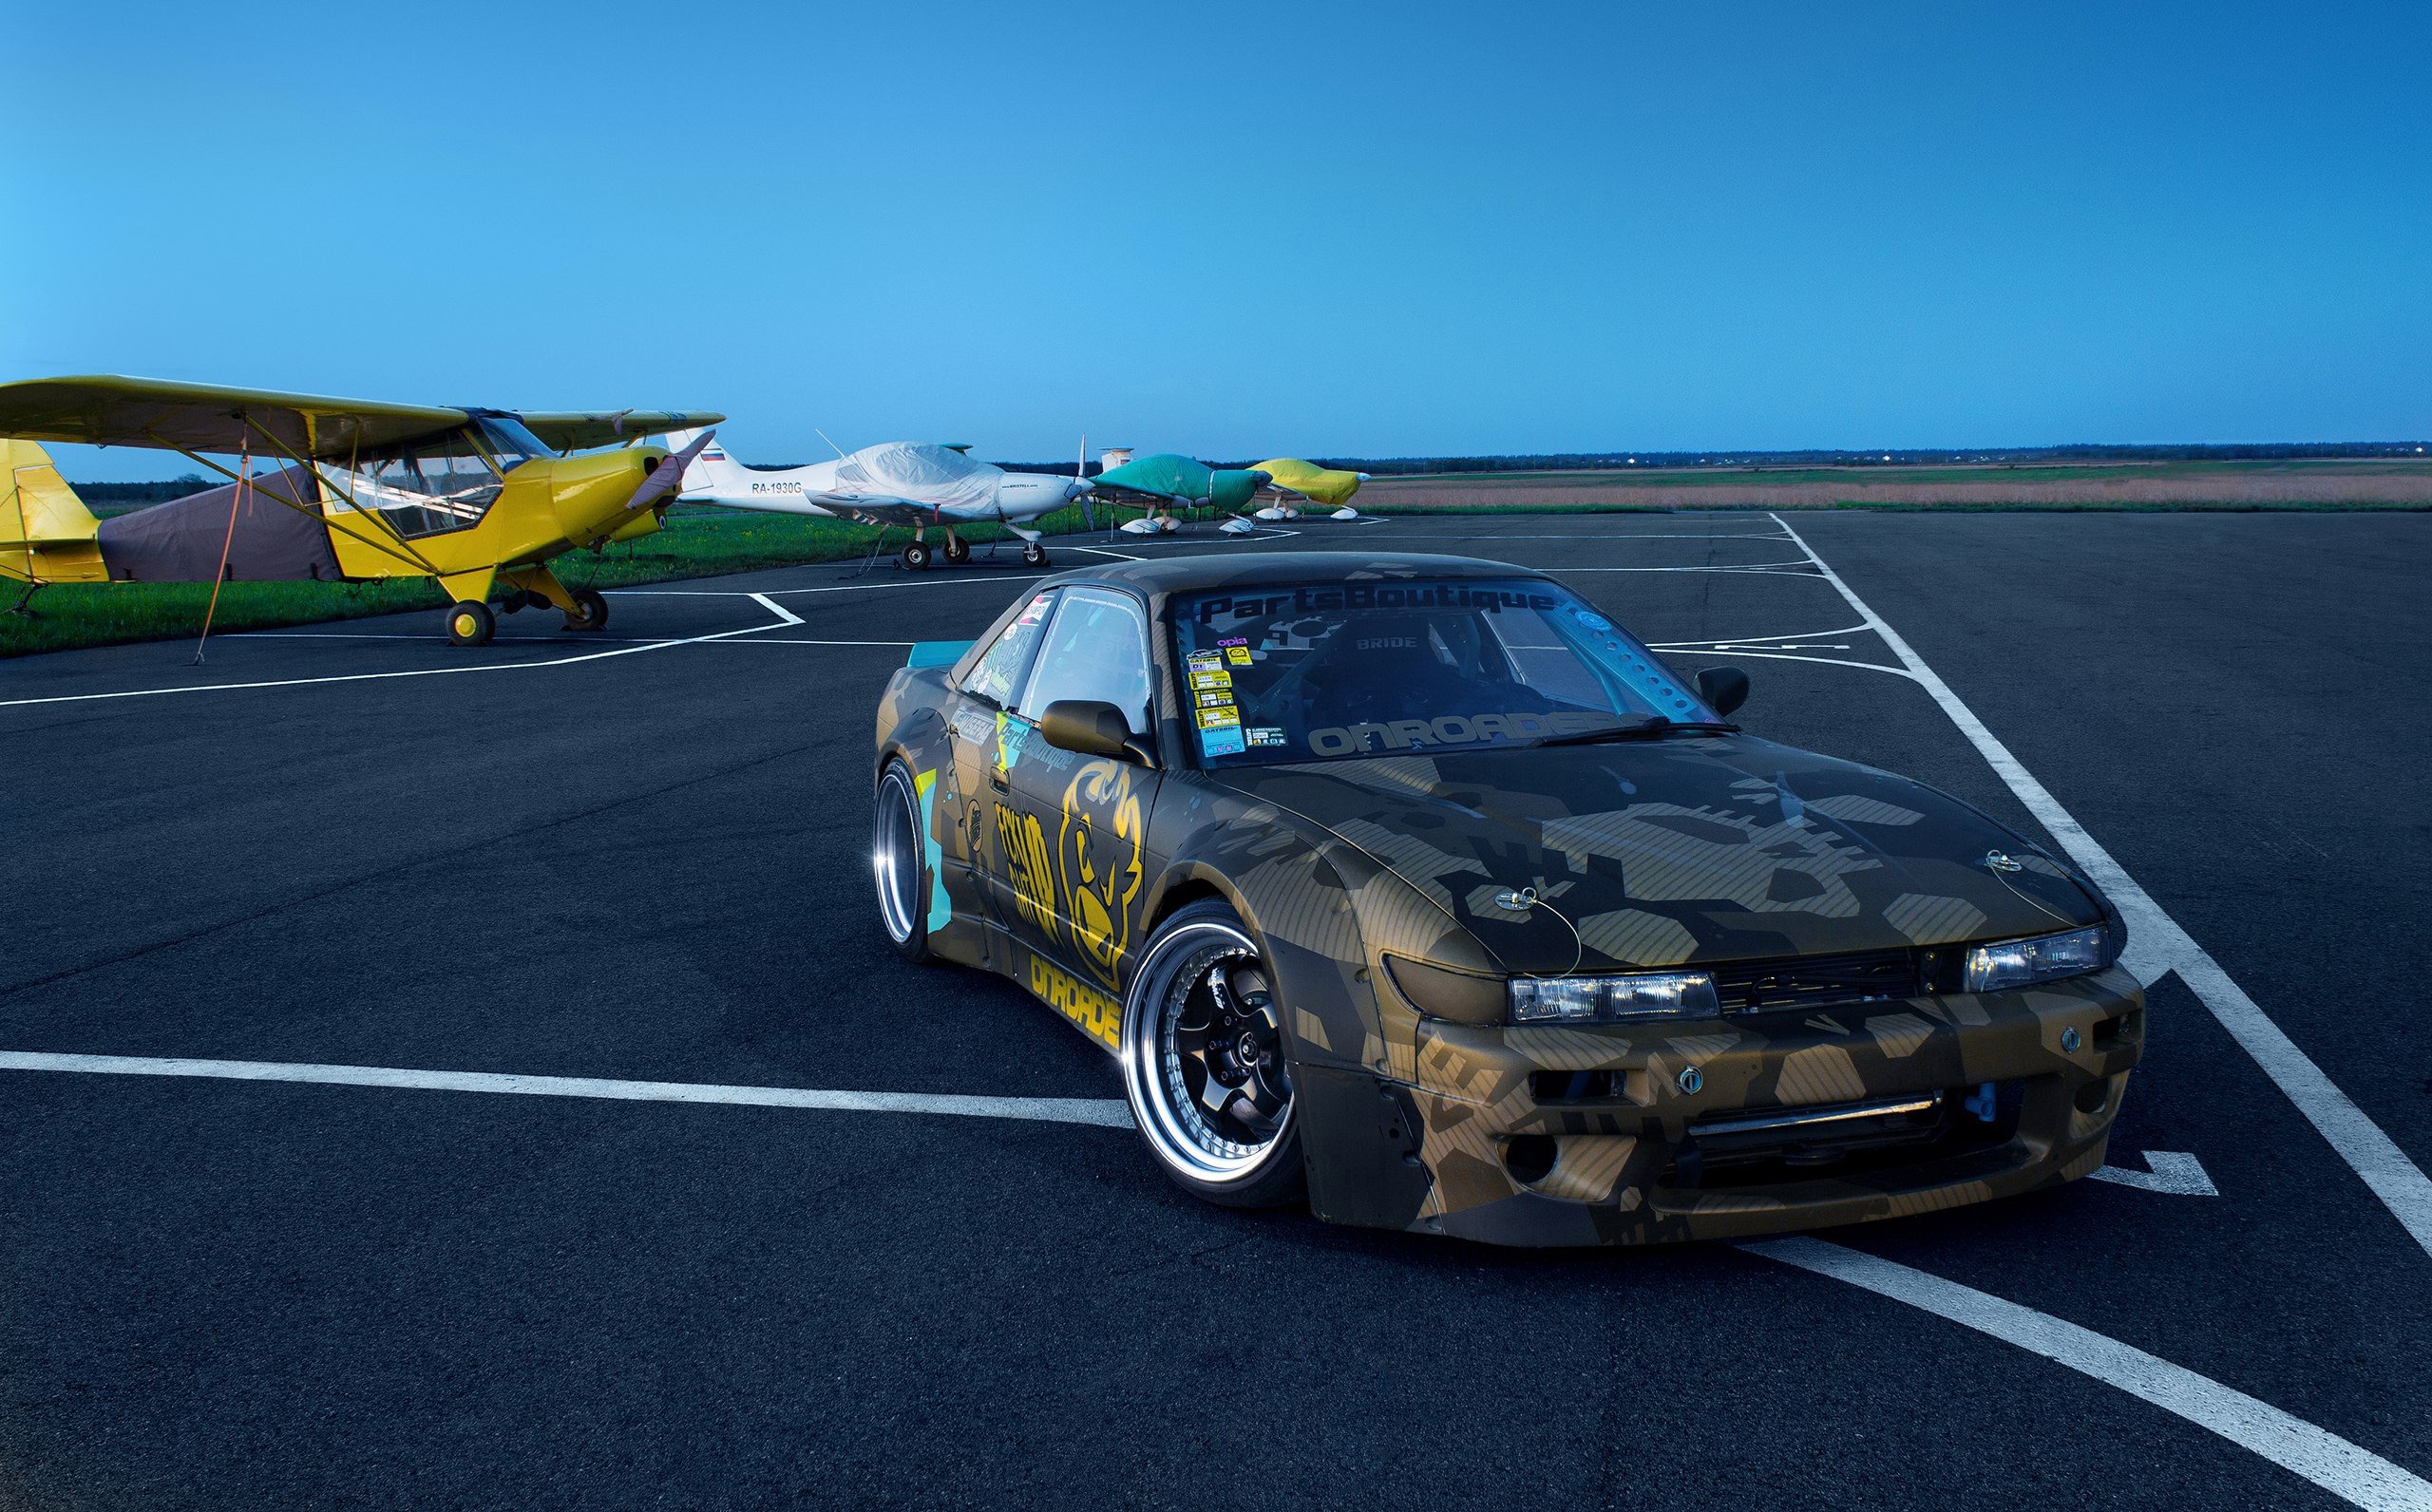 Nissan, Nissan S13, Nissan silvia, Nissan Silvia S13, S13, Silvia S13, JDM, JDM Lifestyle, Japanese cars, Norway, Stance, Photography, Airport, Planes, Evening, Stars, Work Wheels, Japan Wallpaper